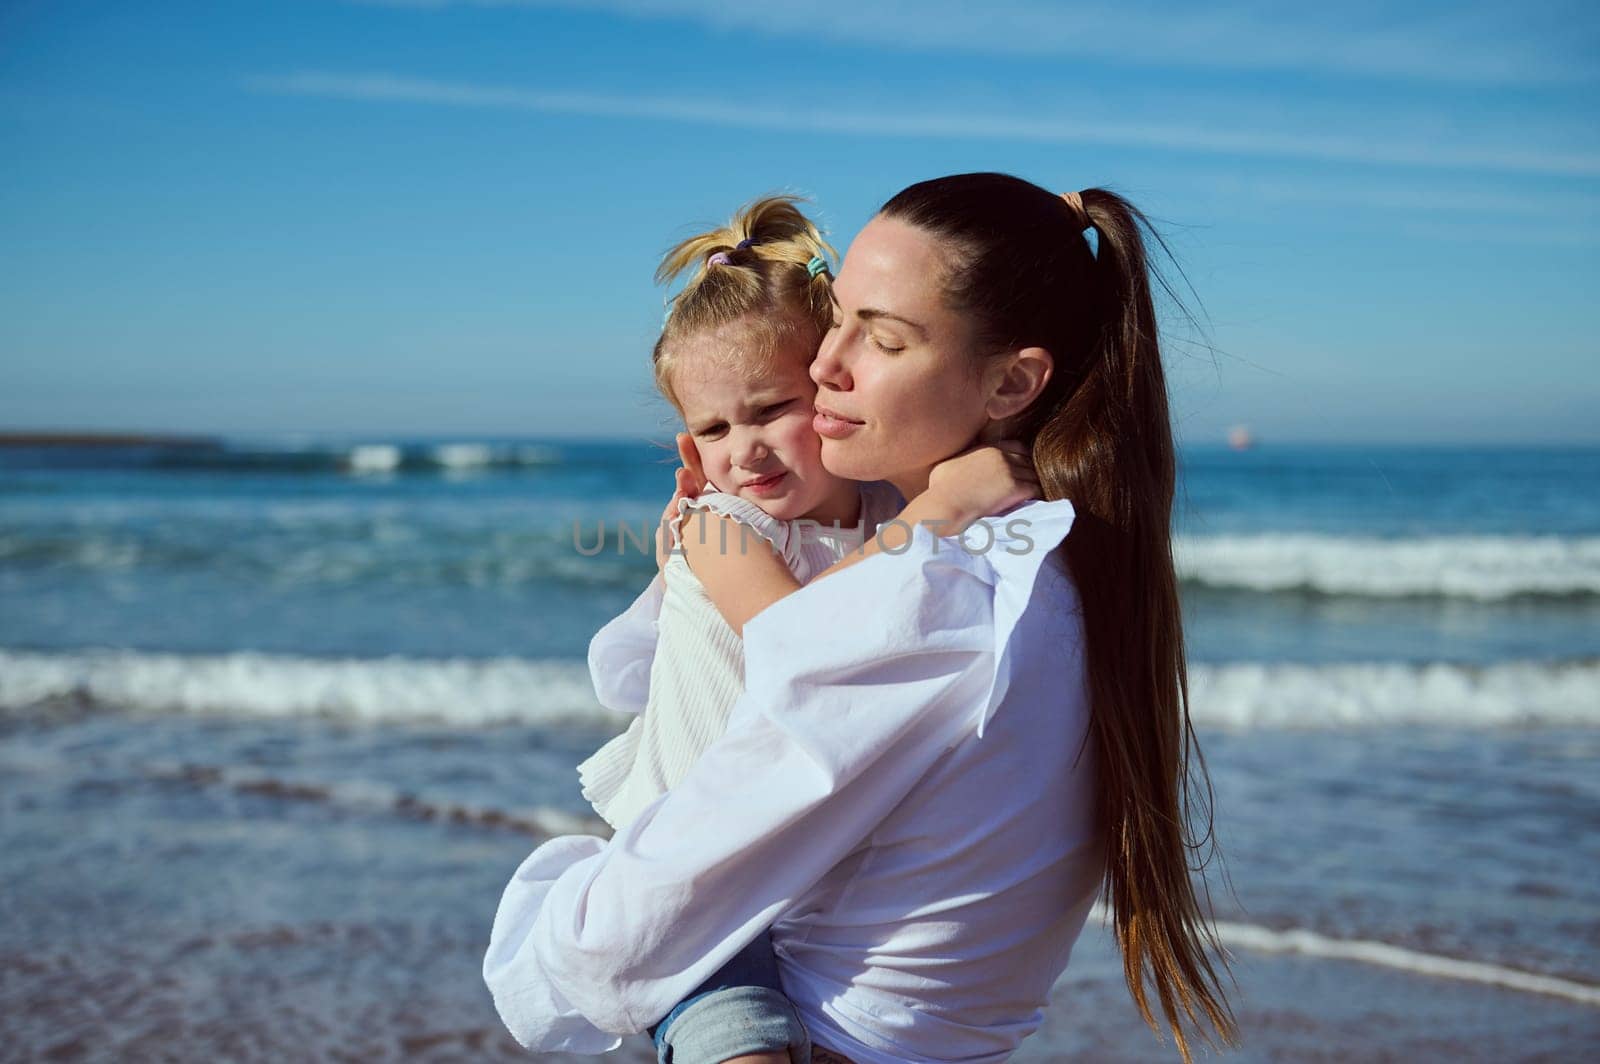 Authentic portrait of a beautiful young Caucasian woman carrying and gently hugging her little daughter, enjoying happy time together while walking on the beach. People. Lifestyle. Leisure activity